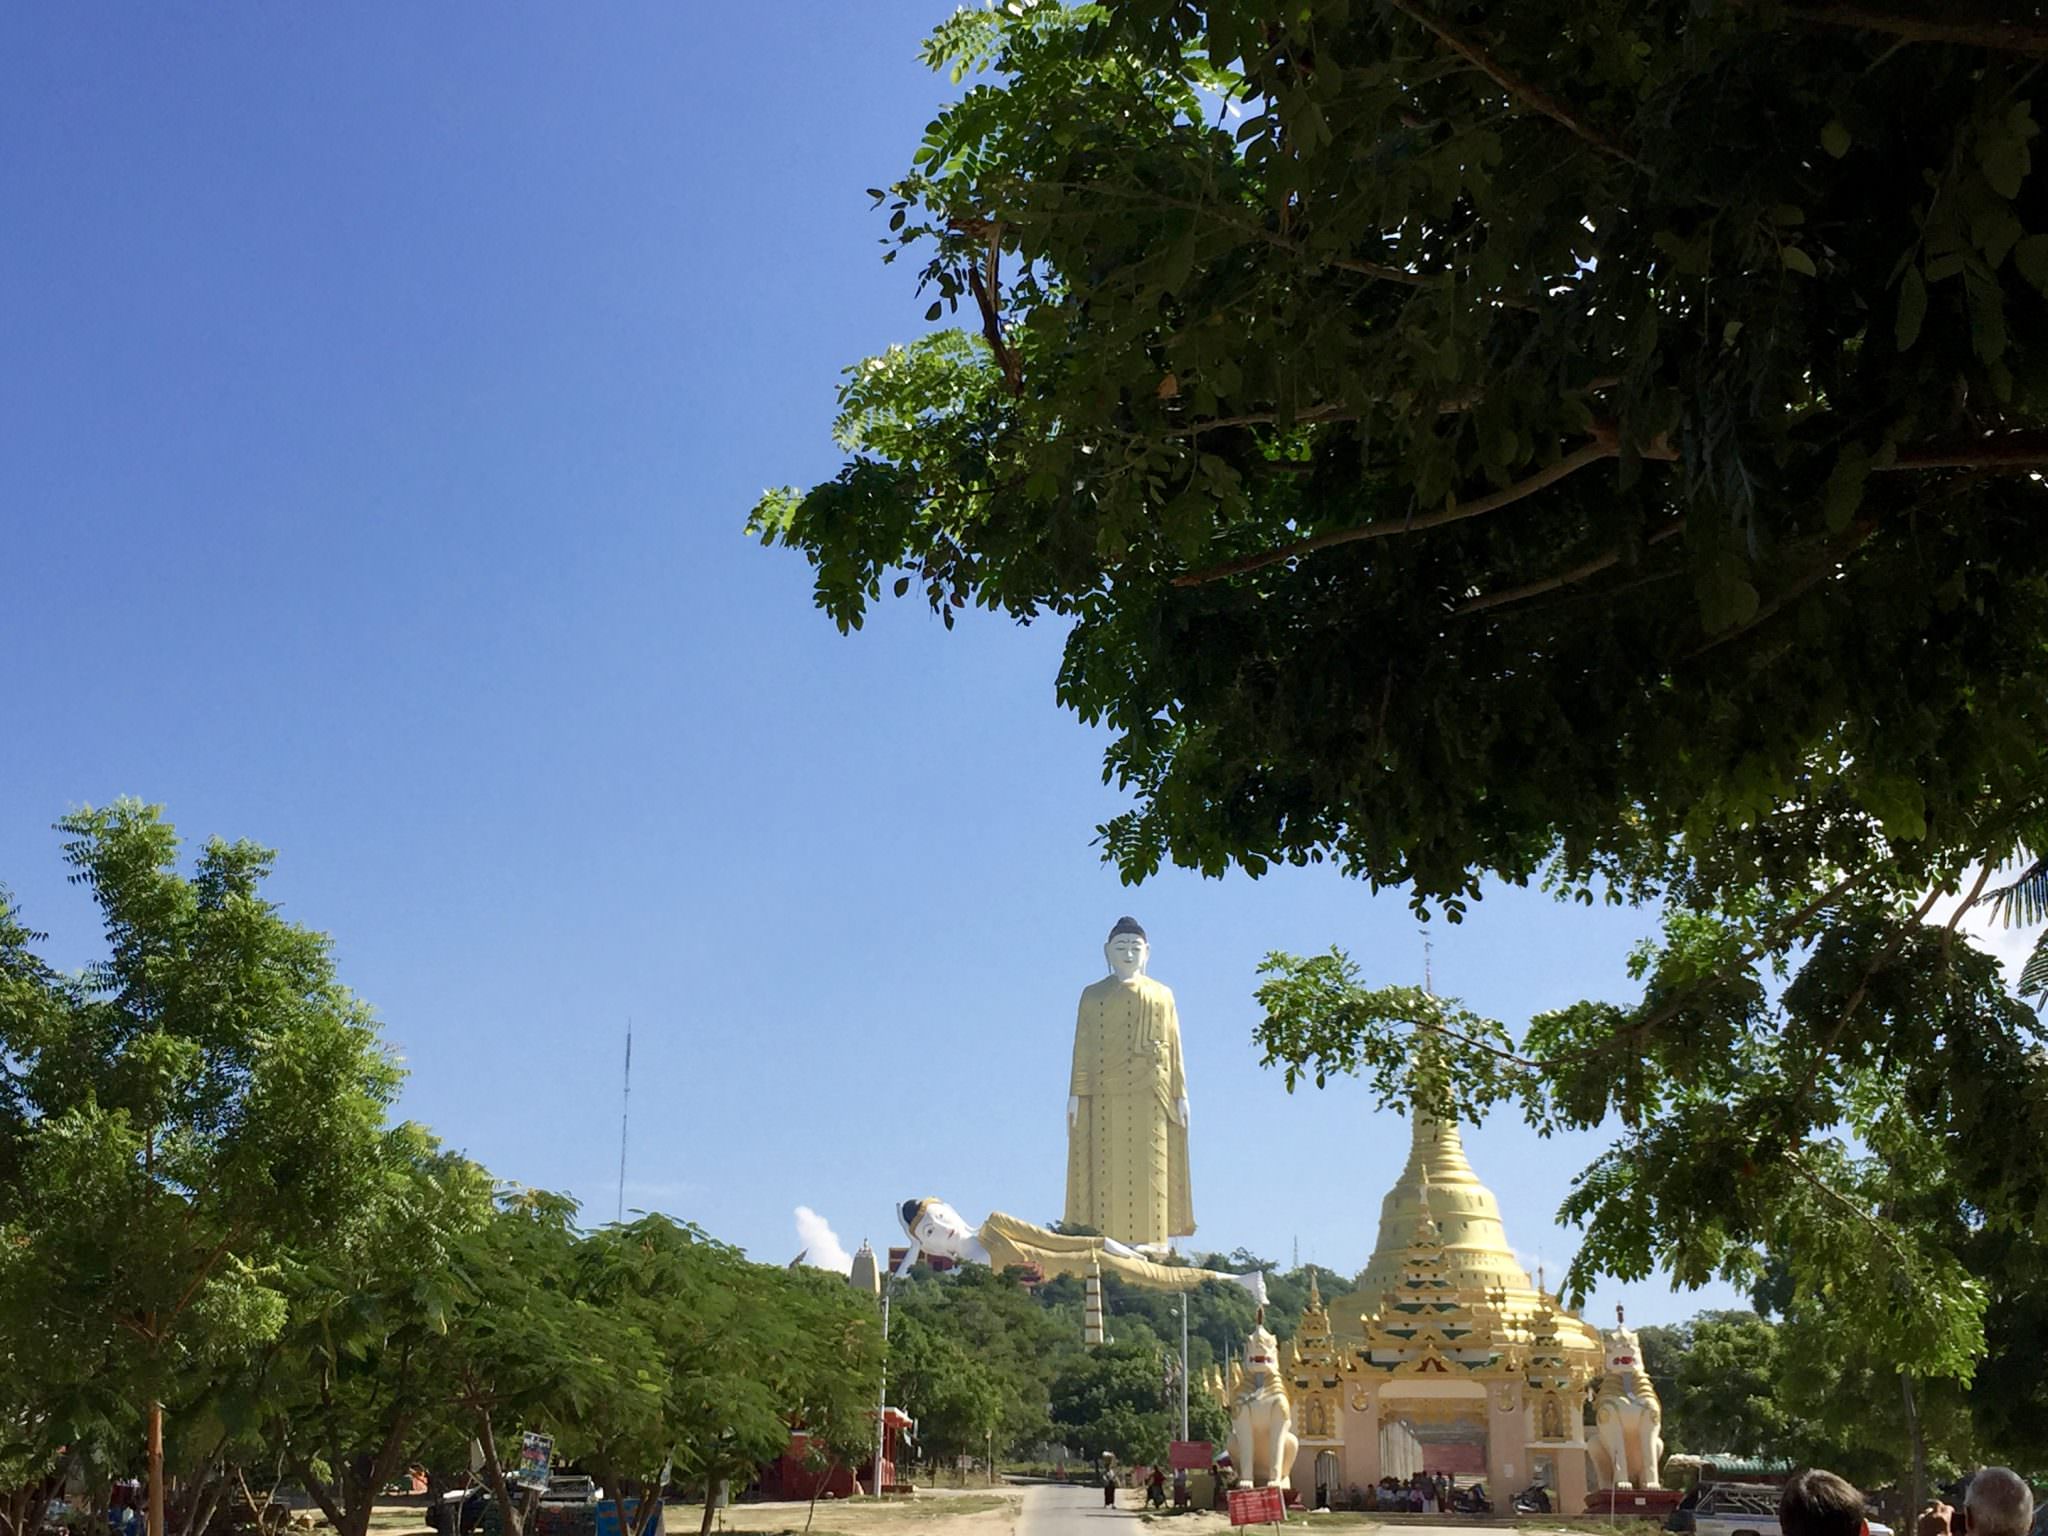 The Monywa buddhas, currently the largest Buddha statues in the world. © 2015 Gail Jessen